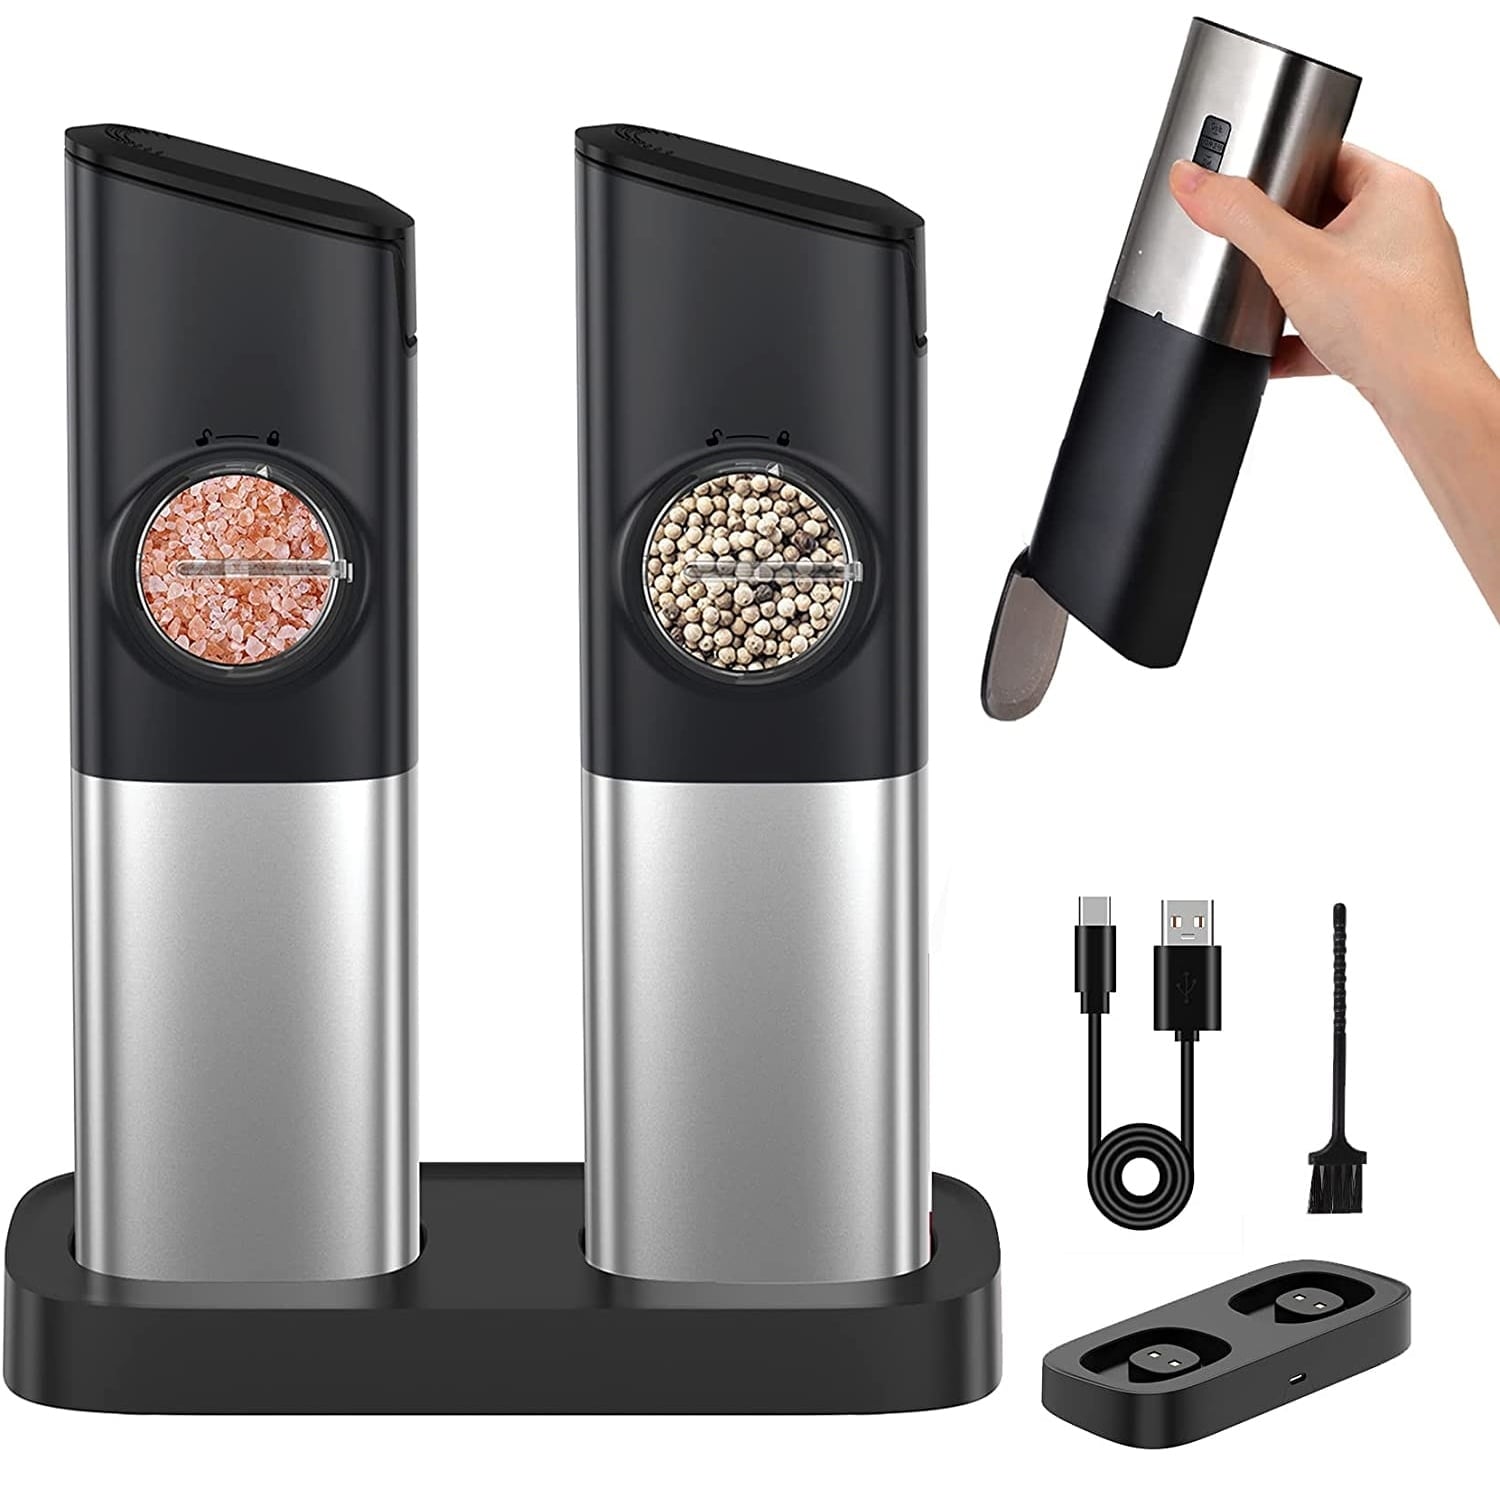 https://ak1.ostkcdn.com/images/products/is/images/direct/9ae9ccd9e6662da2bfdc4f7b6c5151b51c776bdc/Electric-Salt-and-Pepper-Grinder-Set.jpg